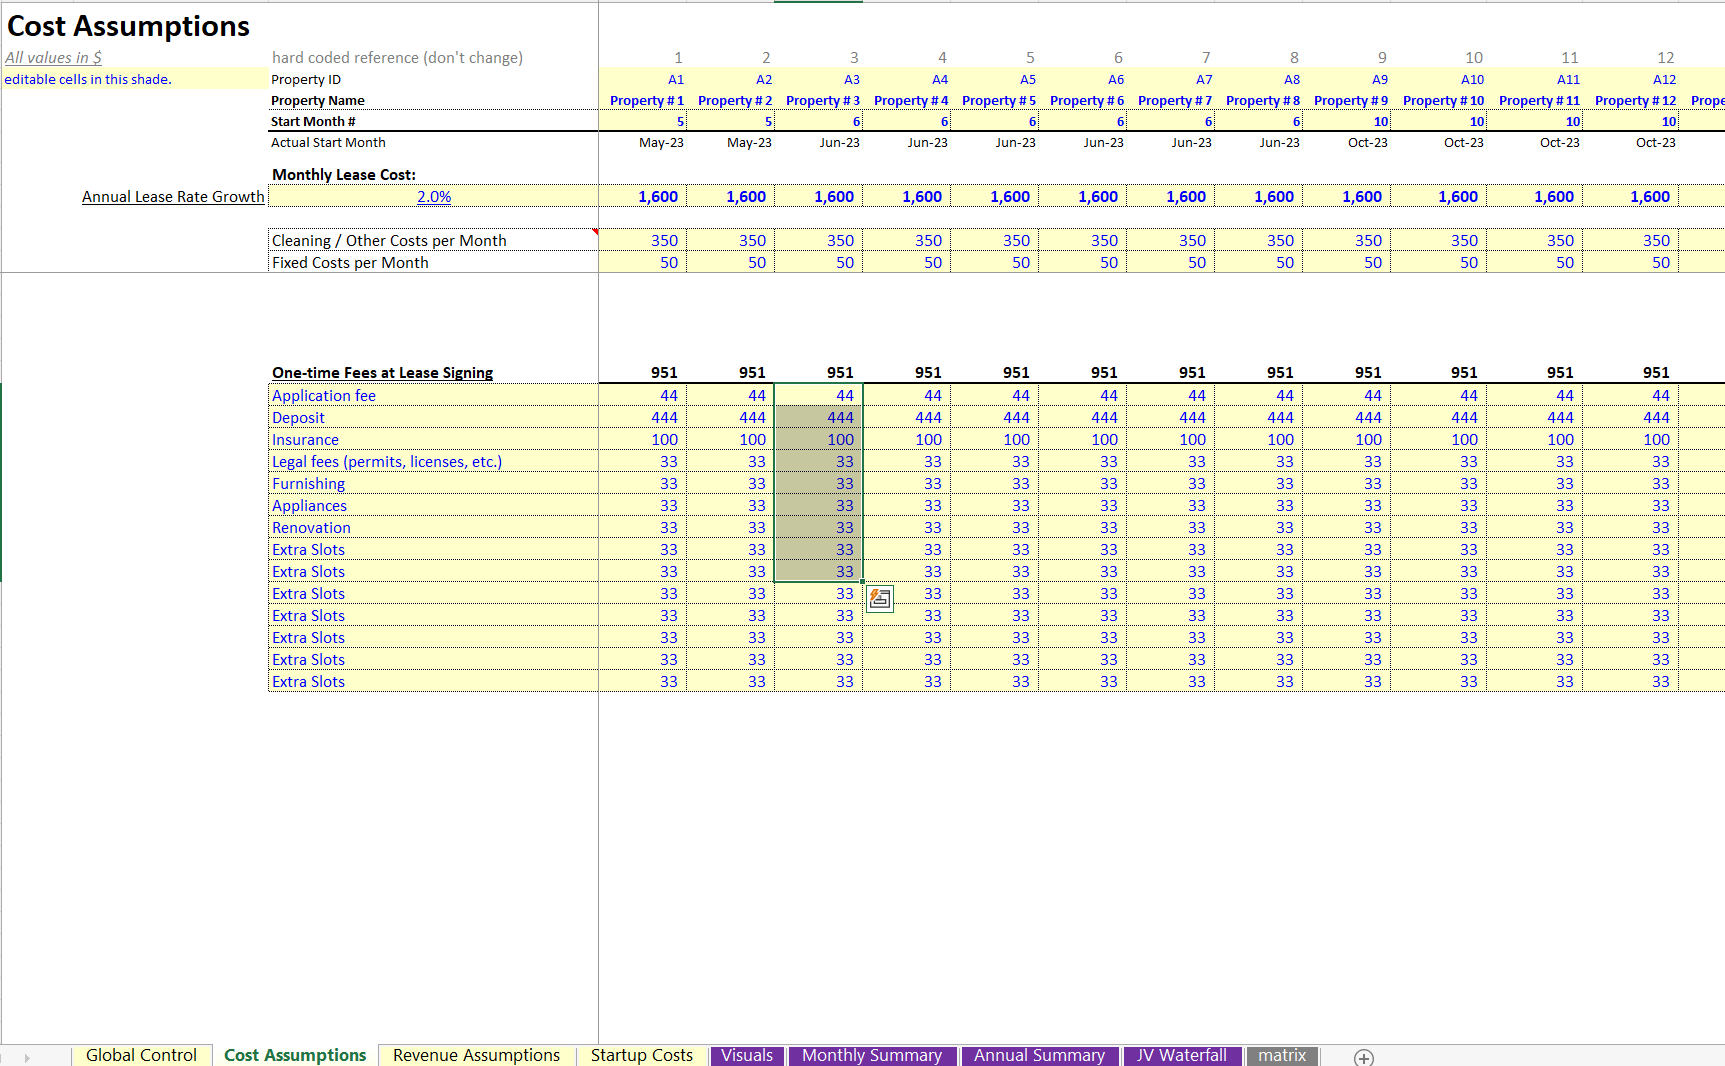 This is a partial preview of Airbnb Arbitrage Financial Model: Up to 100 Properties (Excel workbook (XLSX)). 